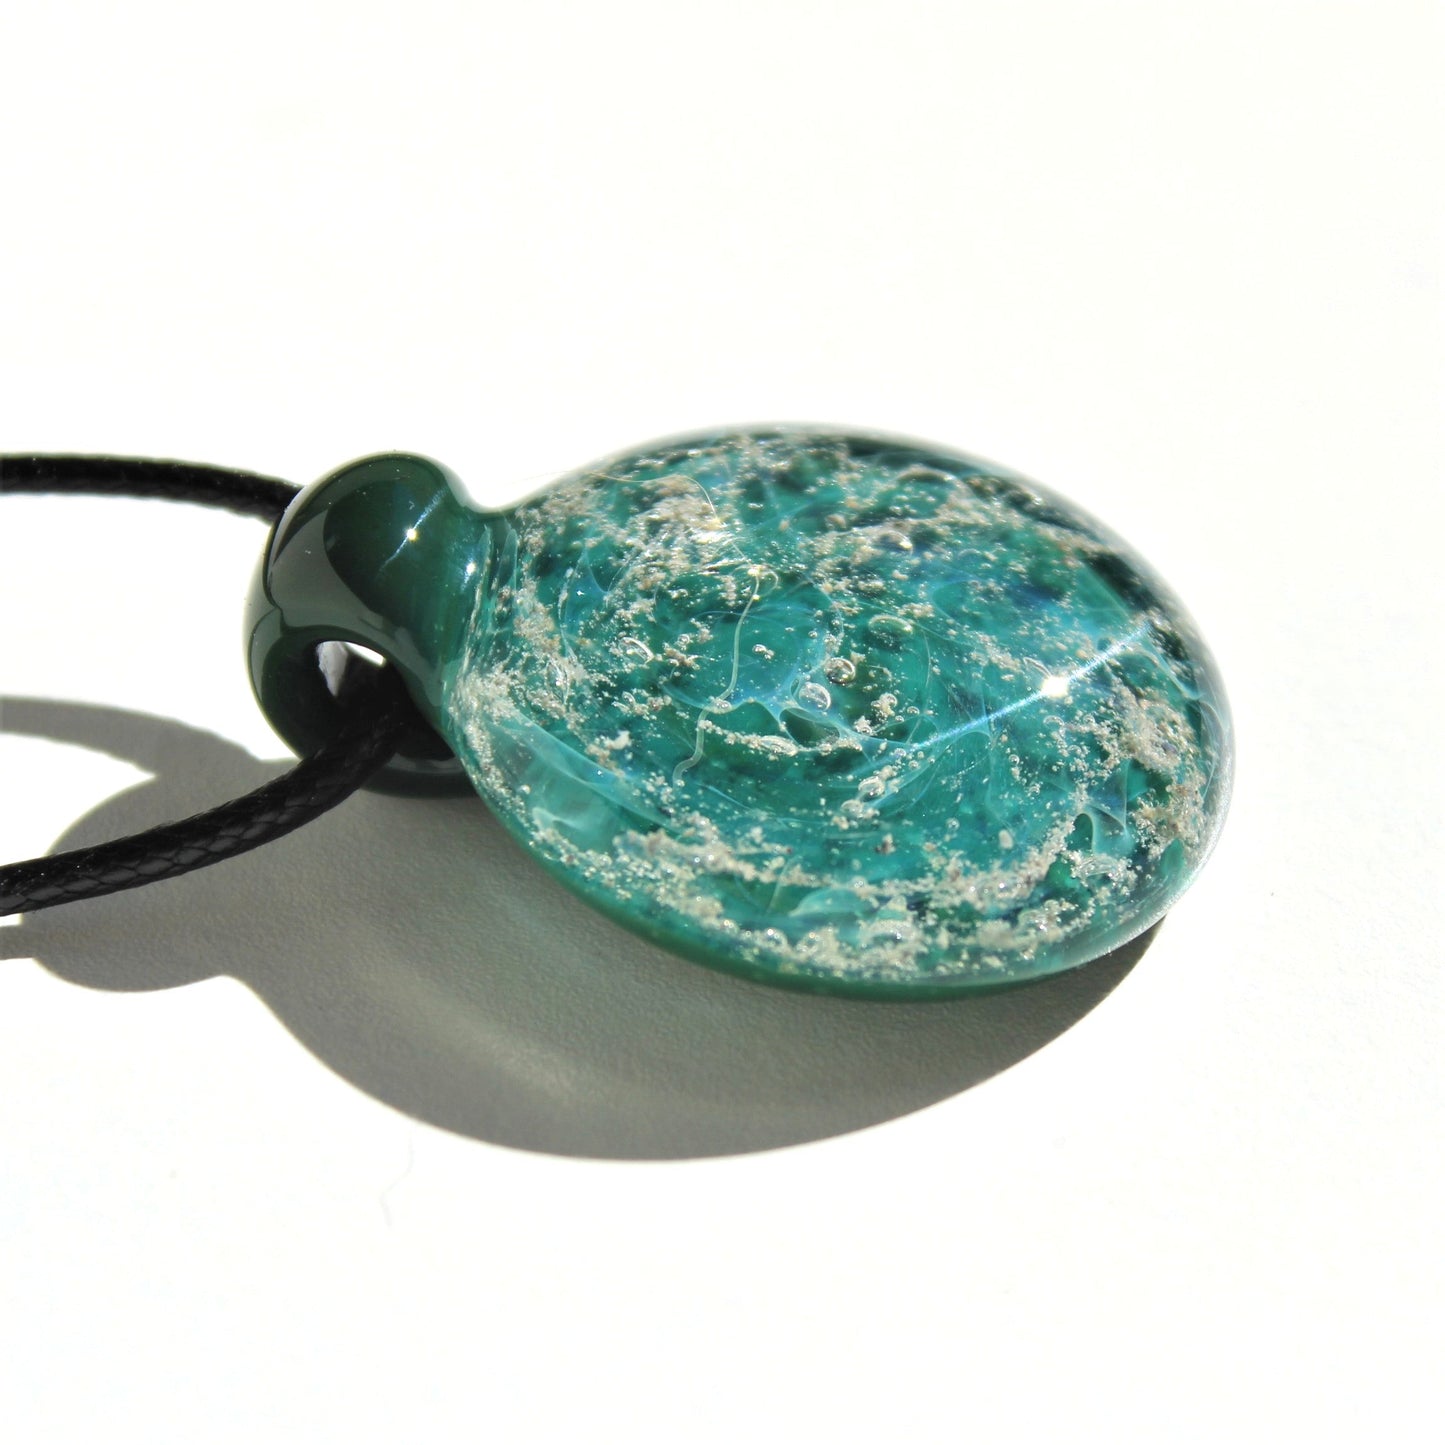 Turquoise Galaxy - Cremation Glass Pendant-Cremation Pendant-DragonFire Glass-Original-DragonFire Glass Cremation Jewelry